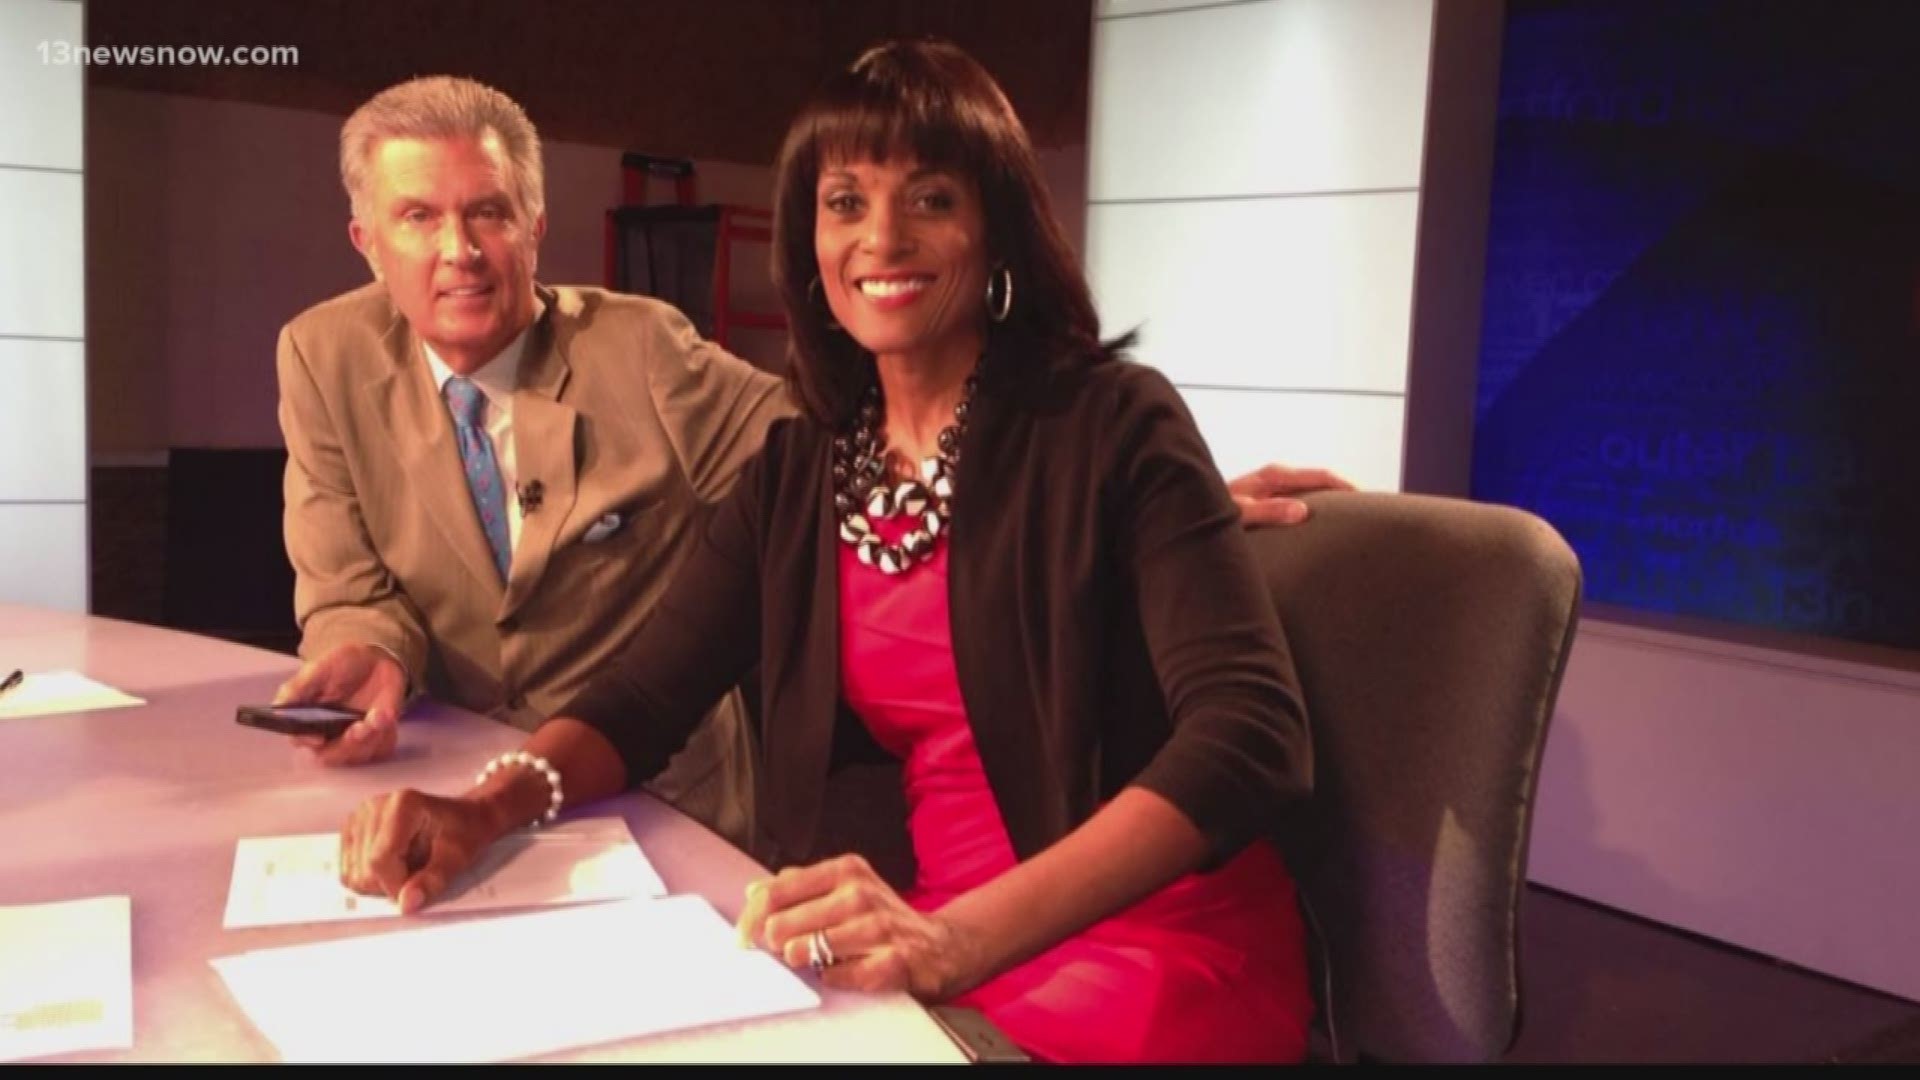 Earlier this week we announced the departure of our long-time friend and colleague Regina Mobley. She's leaving 13News Now after 26 years on the air.